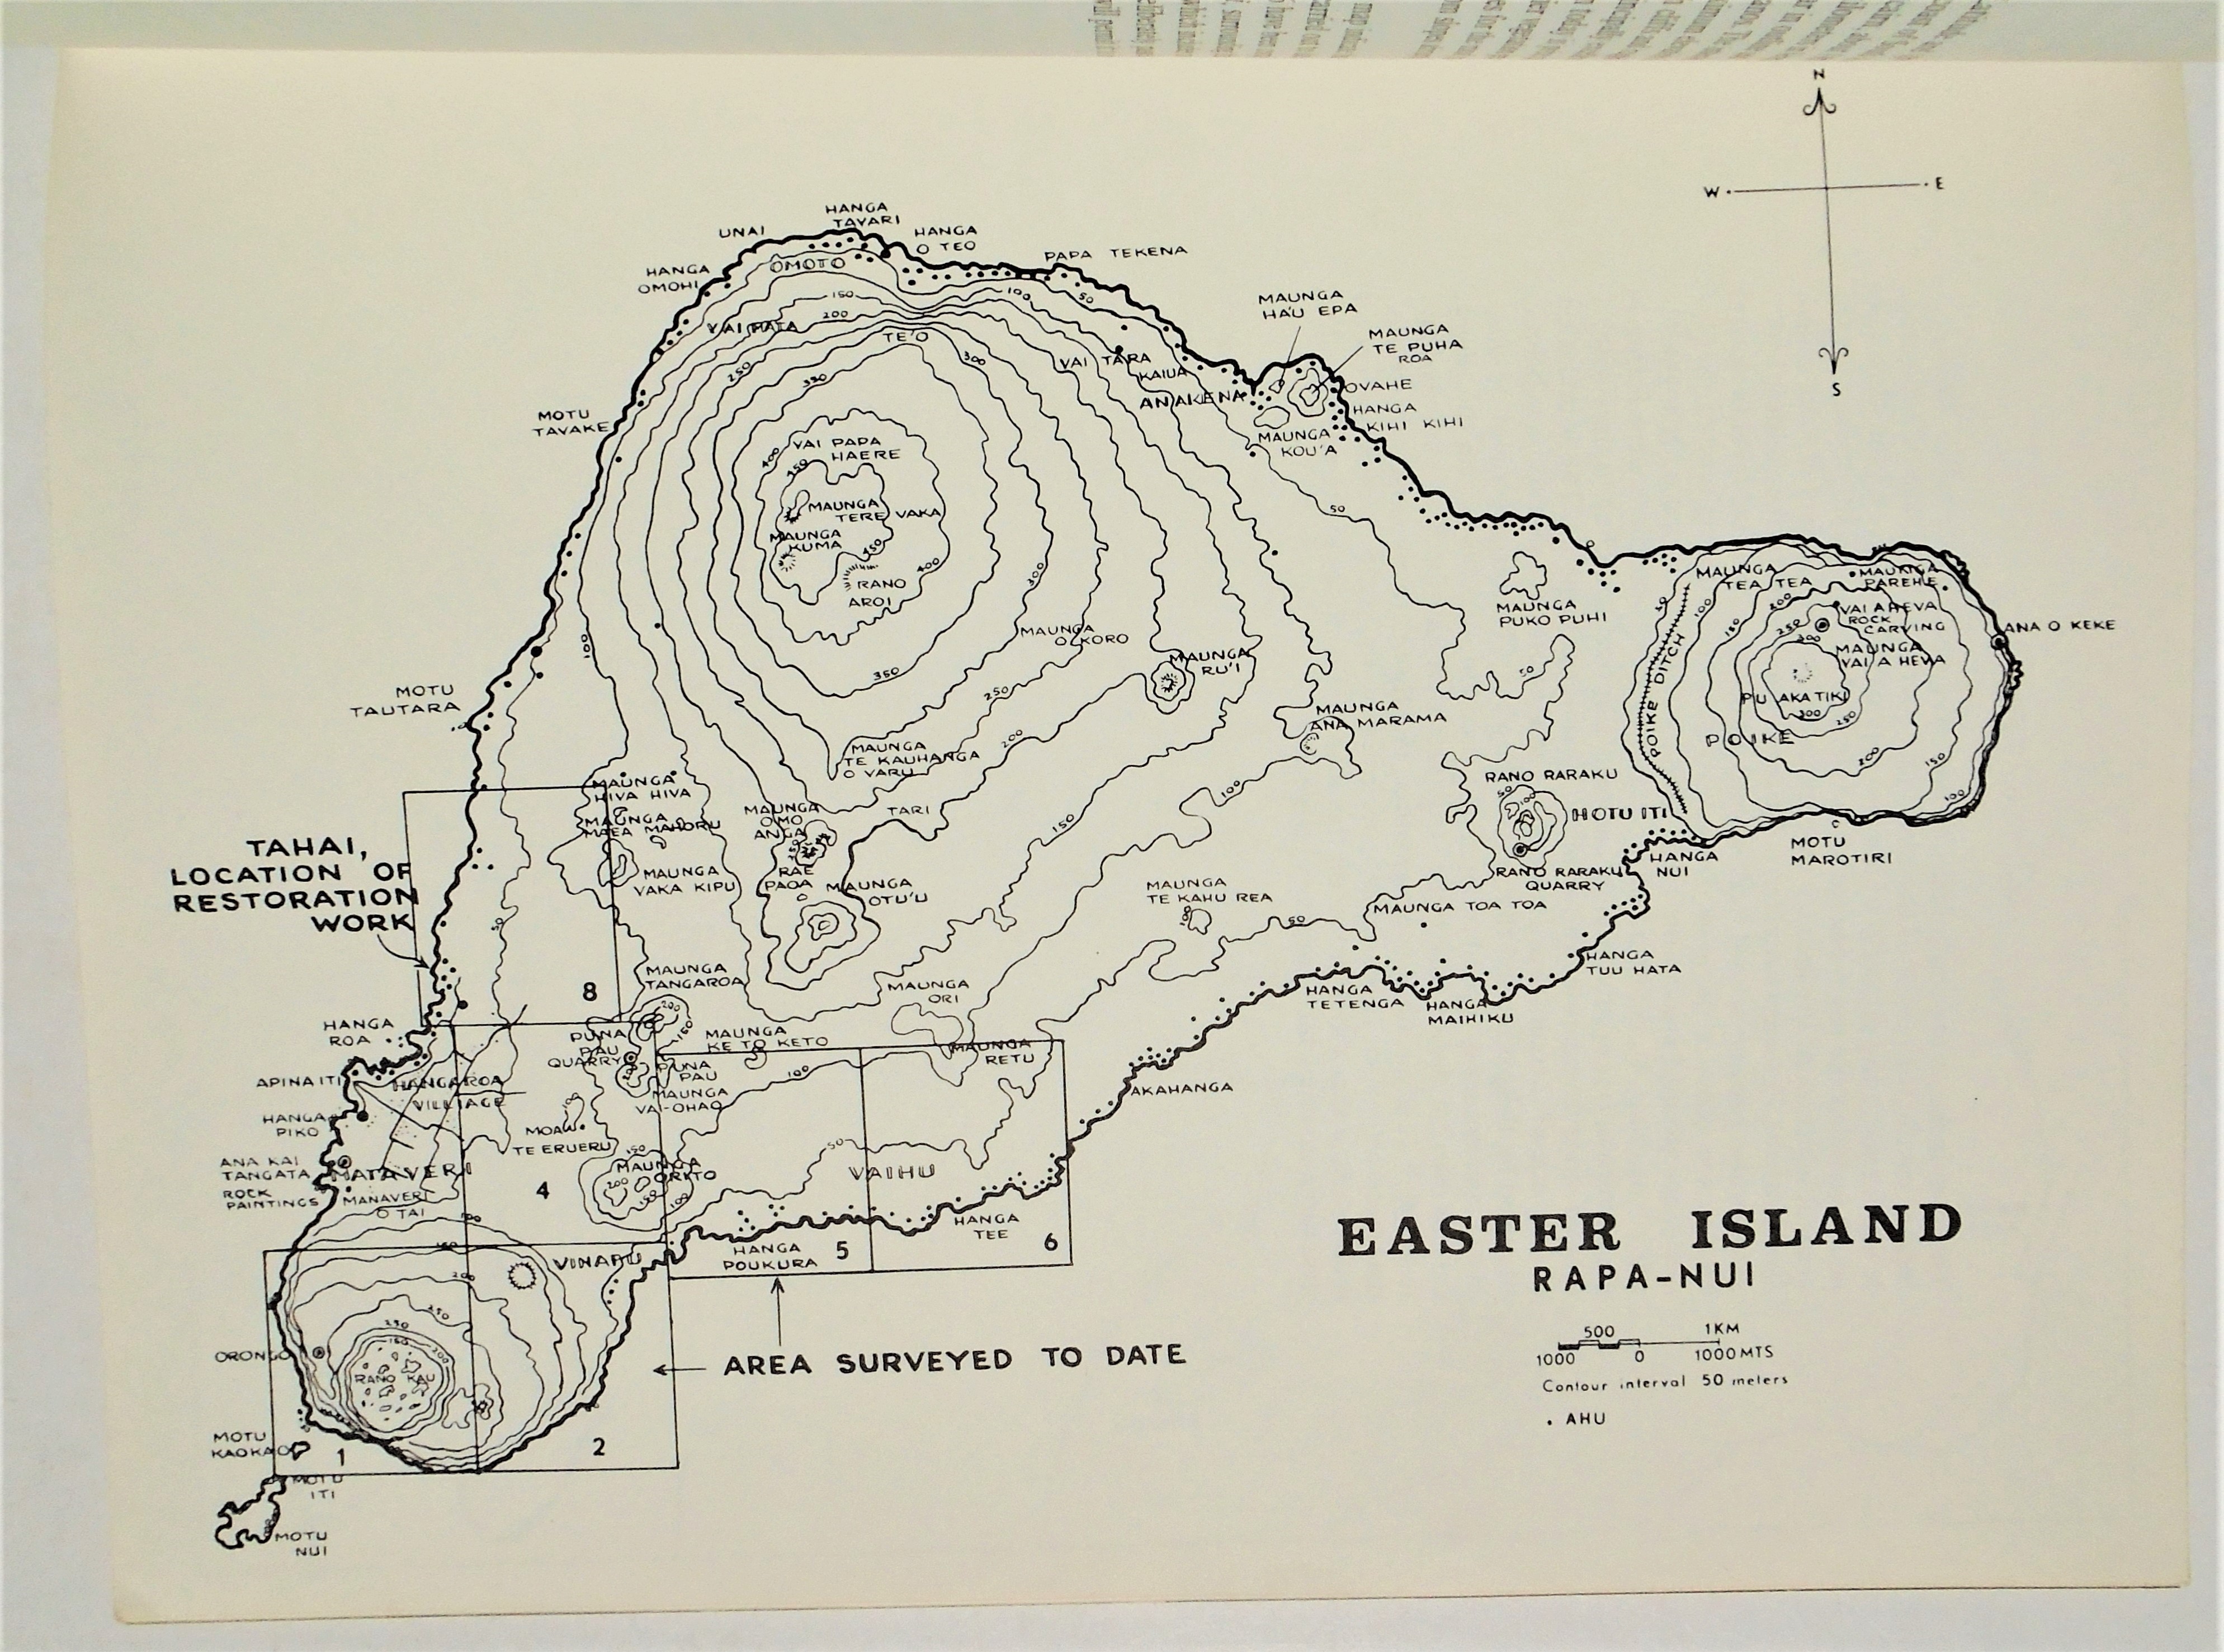 William Mulloy - Preliminary report of the restoration of ahu vai uri easter island